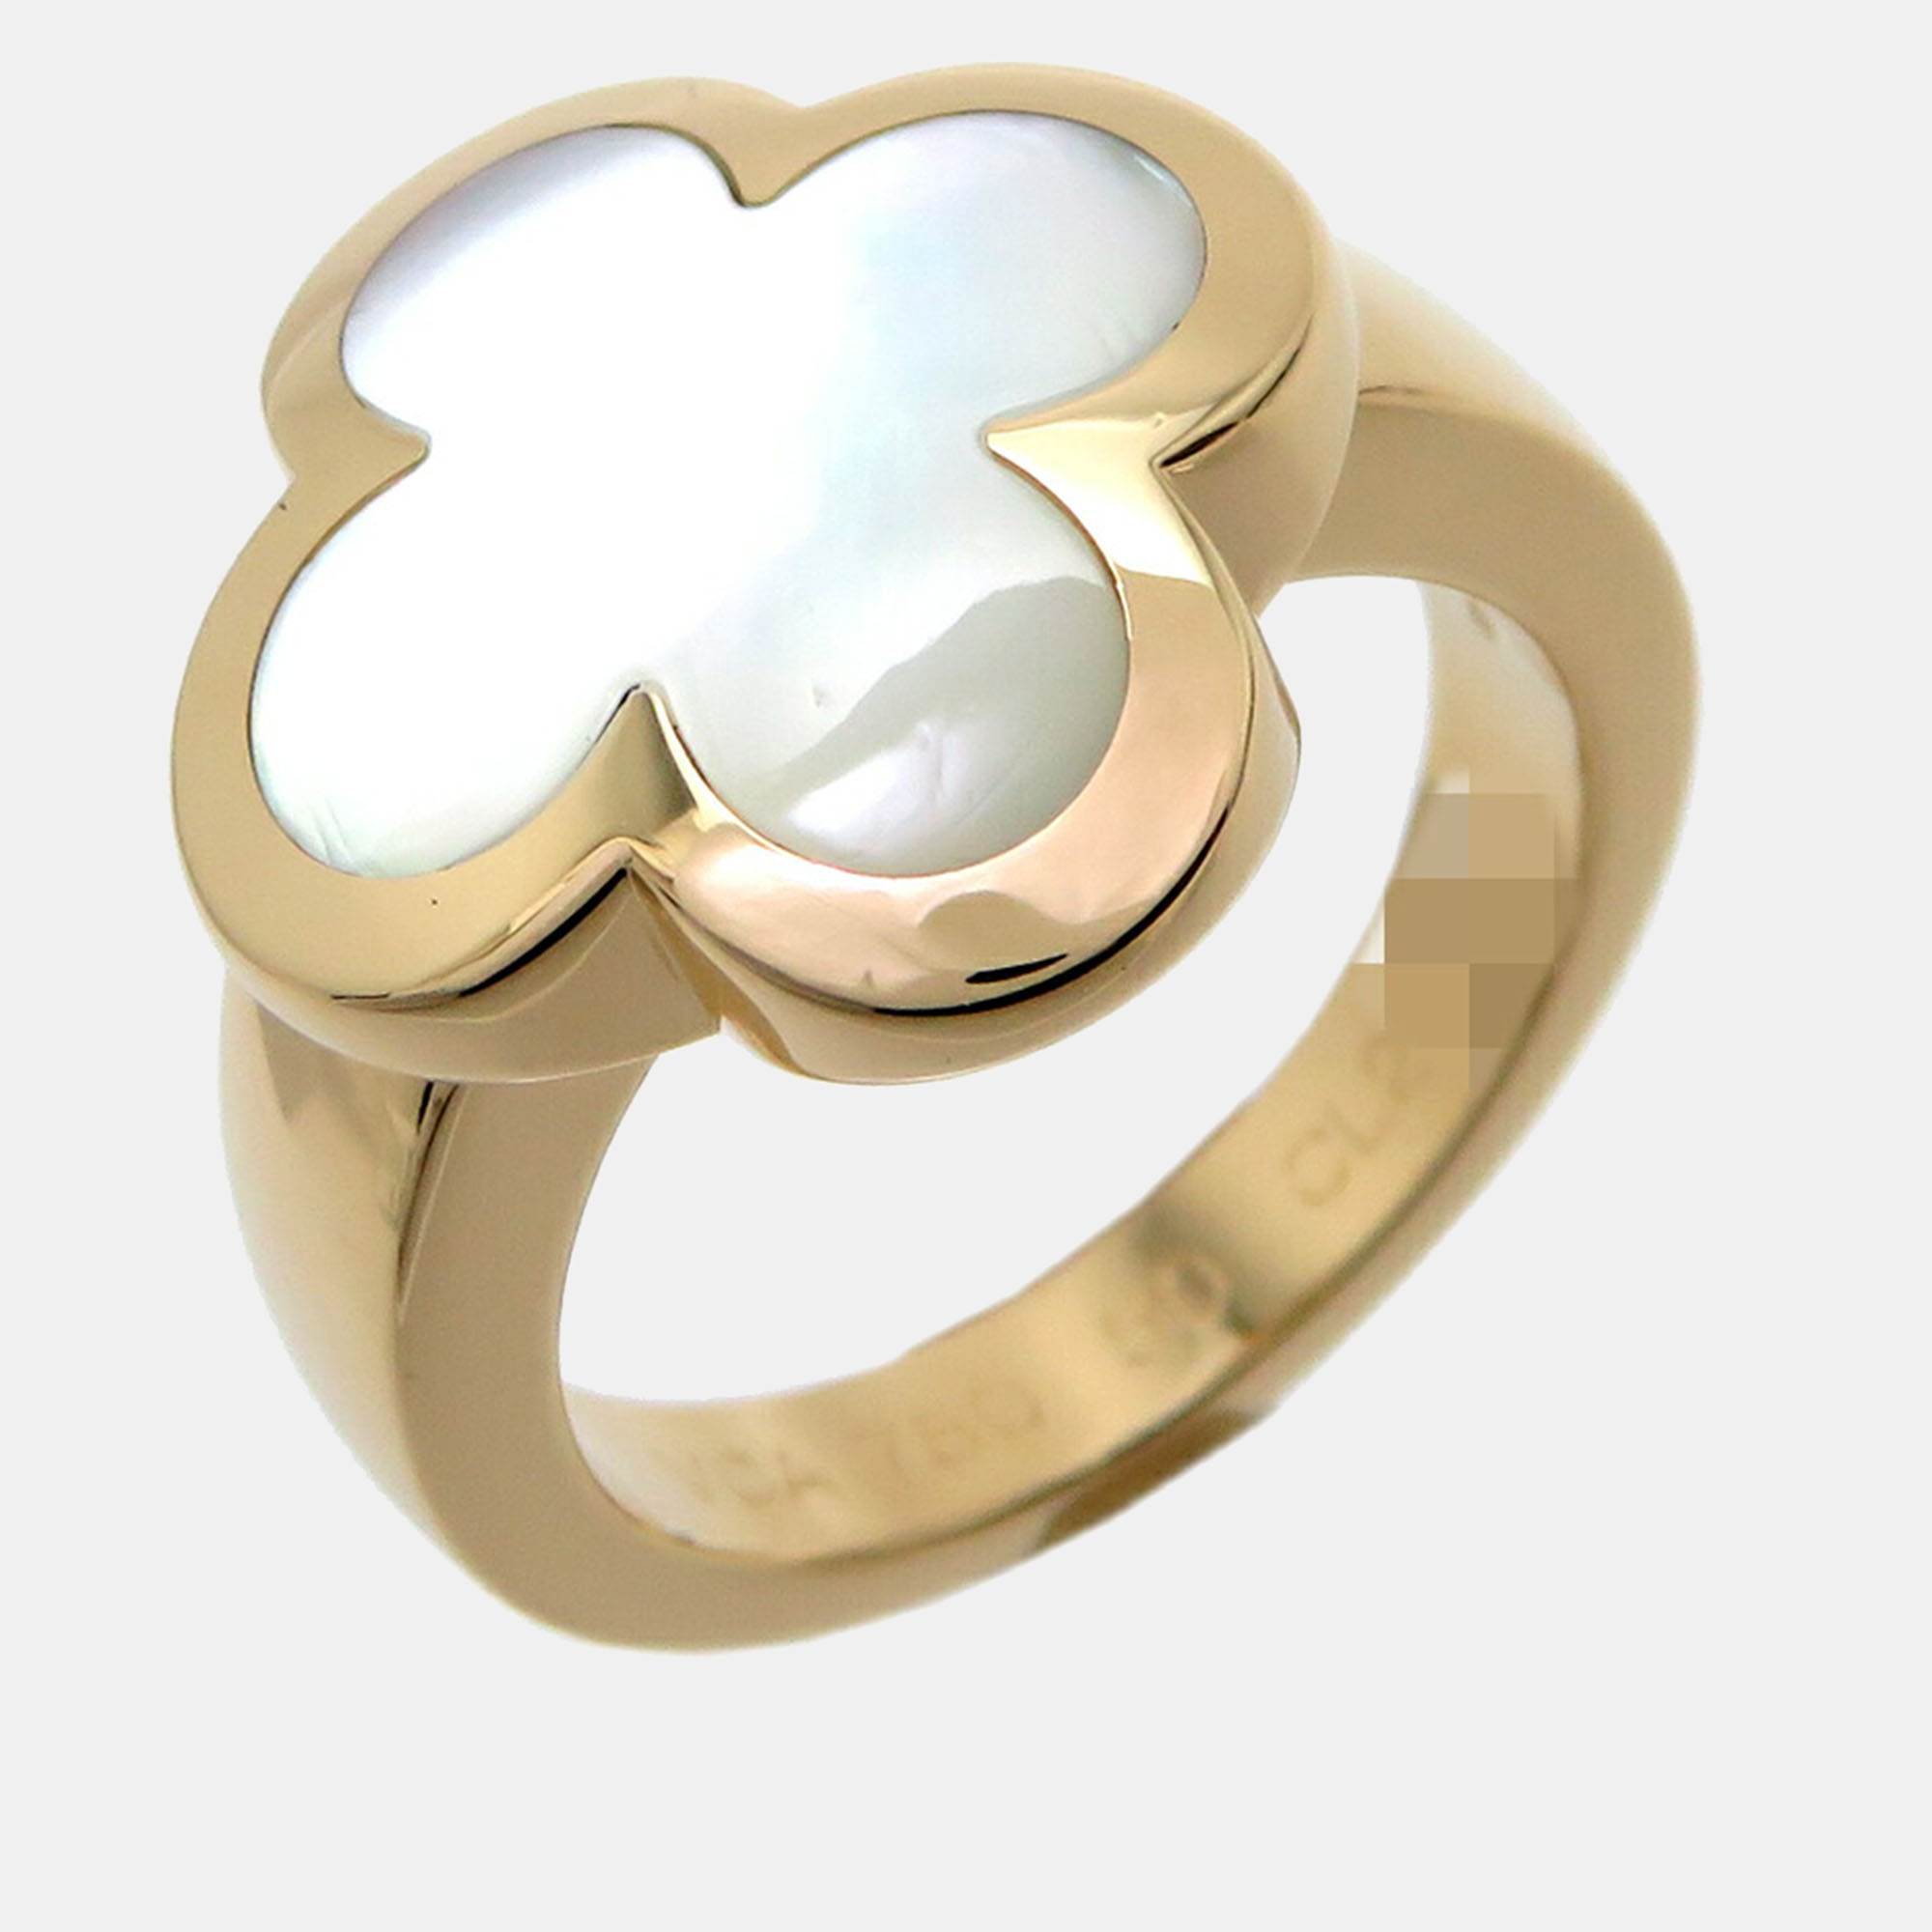 Van cleef & arpels 18k yellow gold and mother of pearl pure alhambra ring eu 60